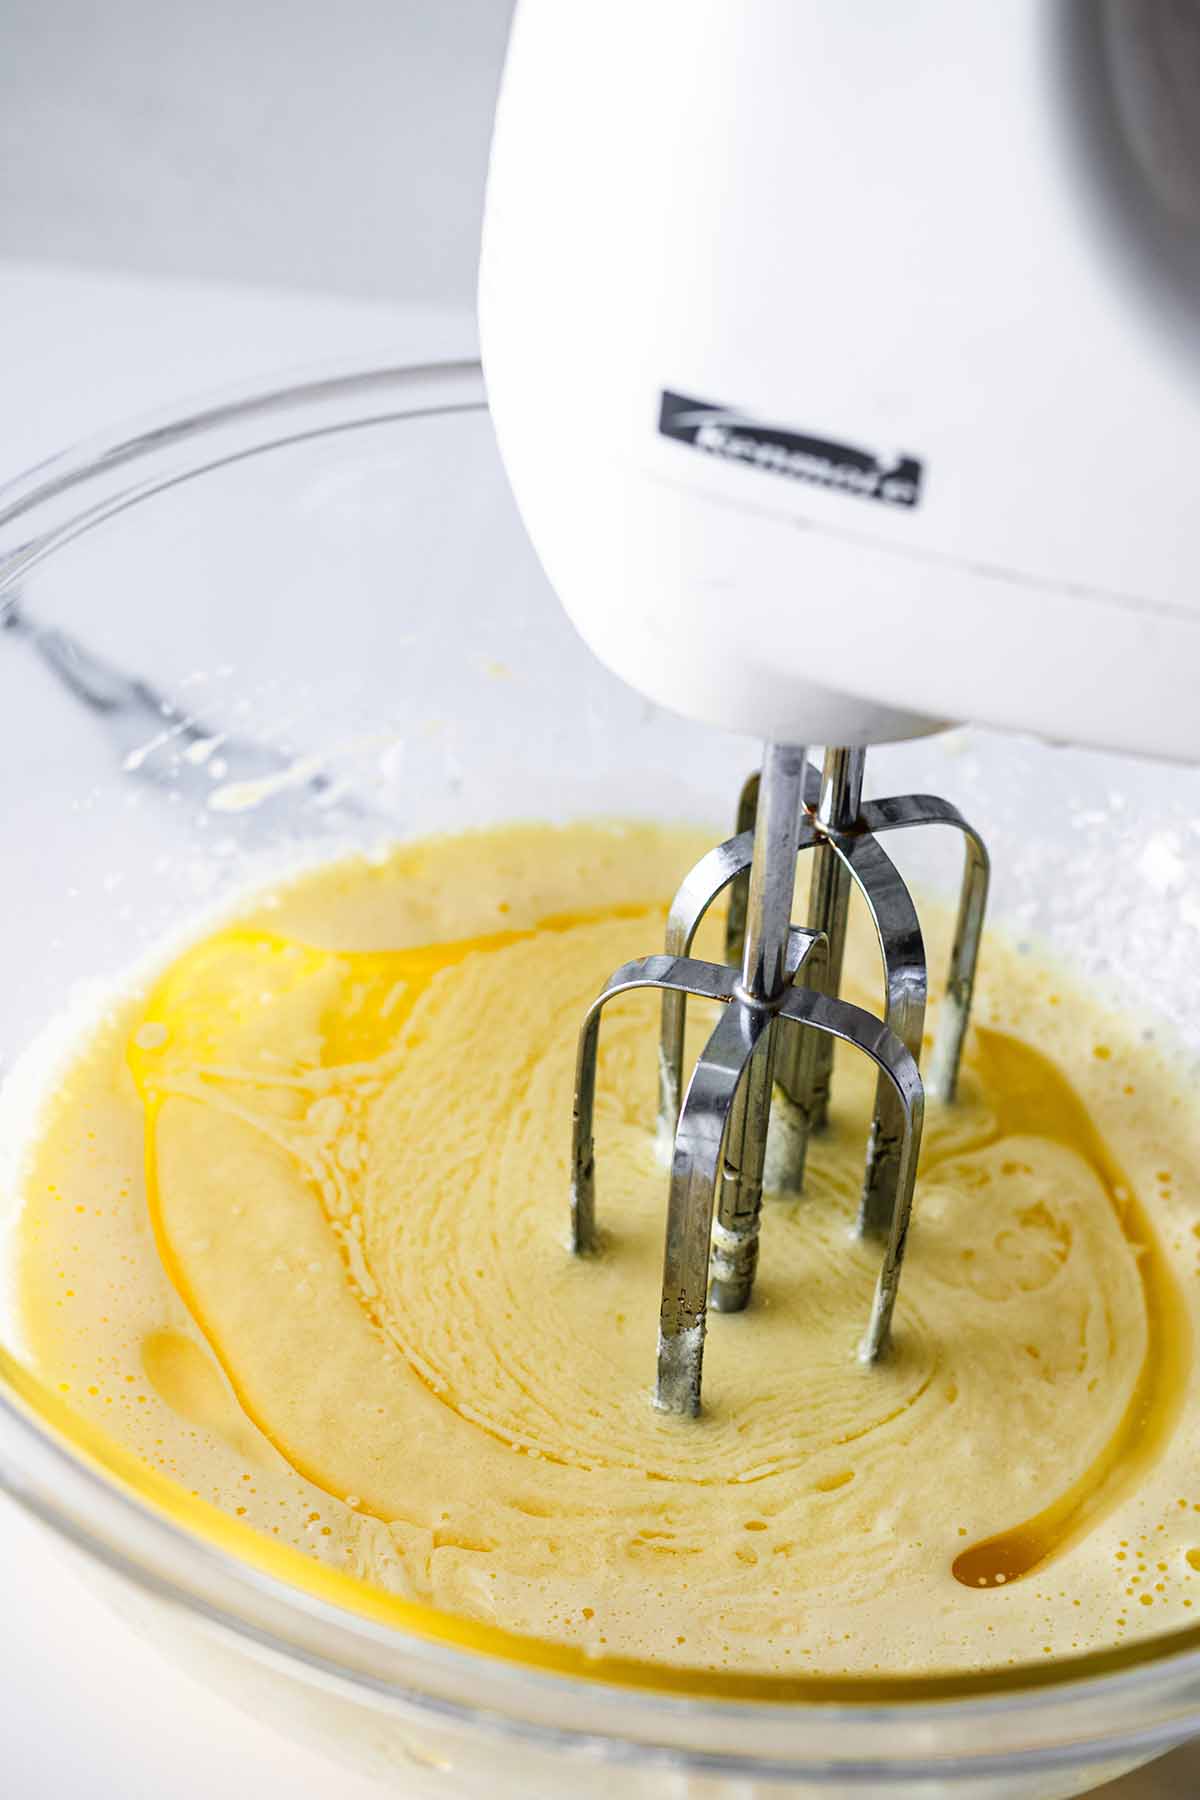 Wet ingredients being mixed with an electric mixer